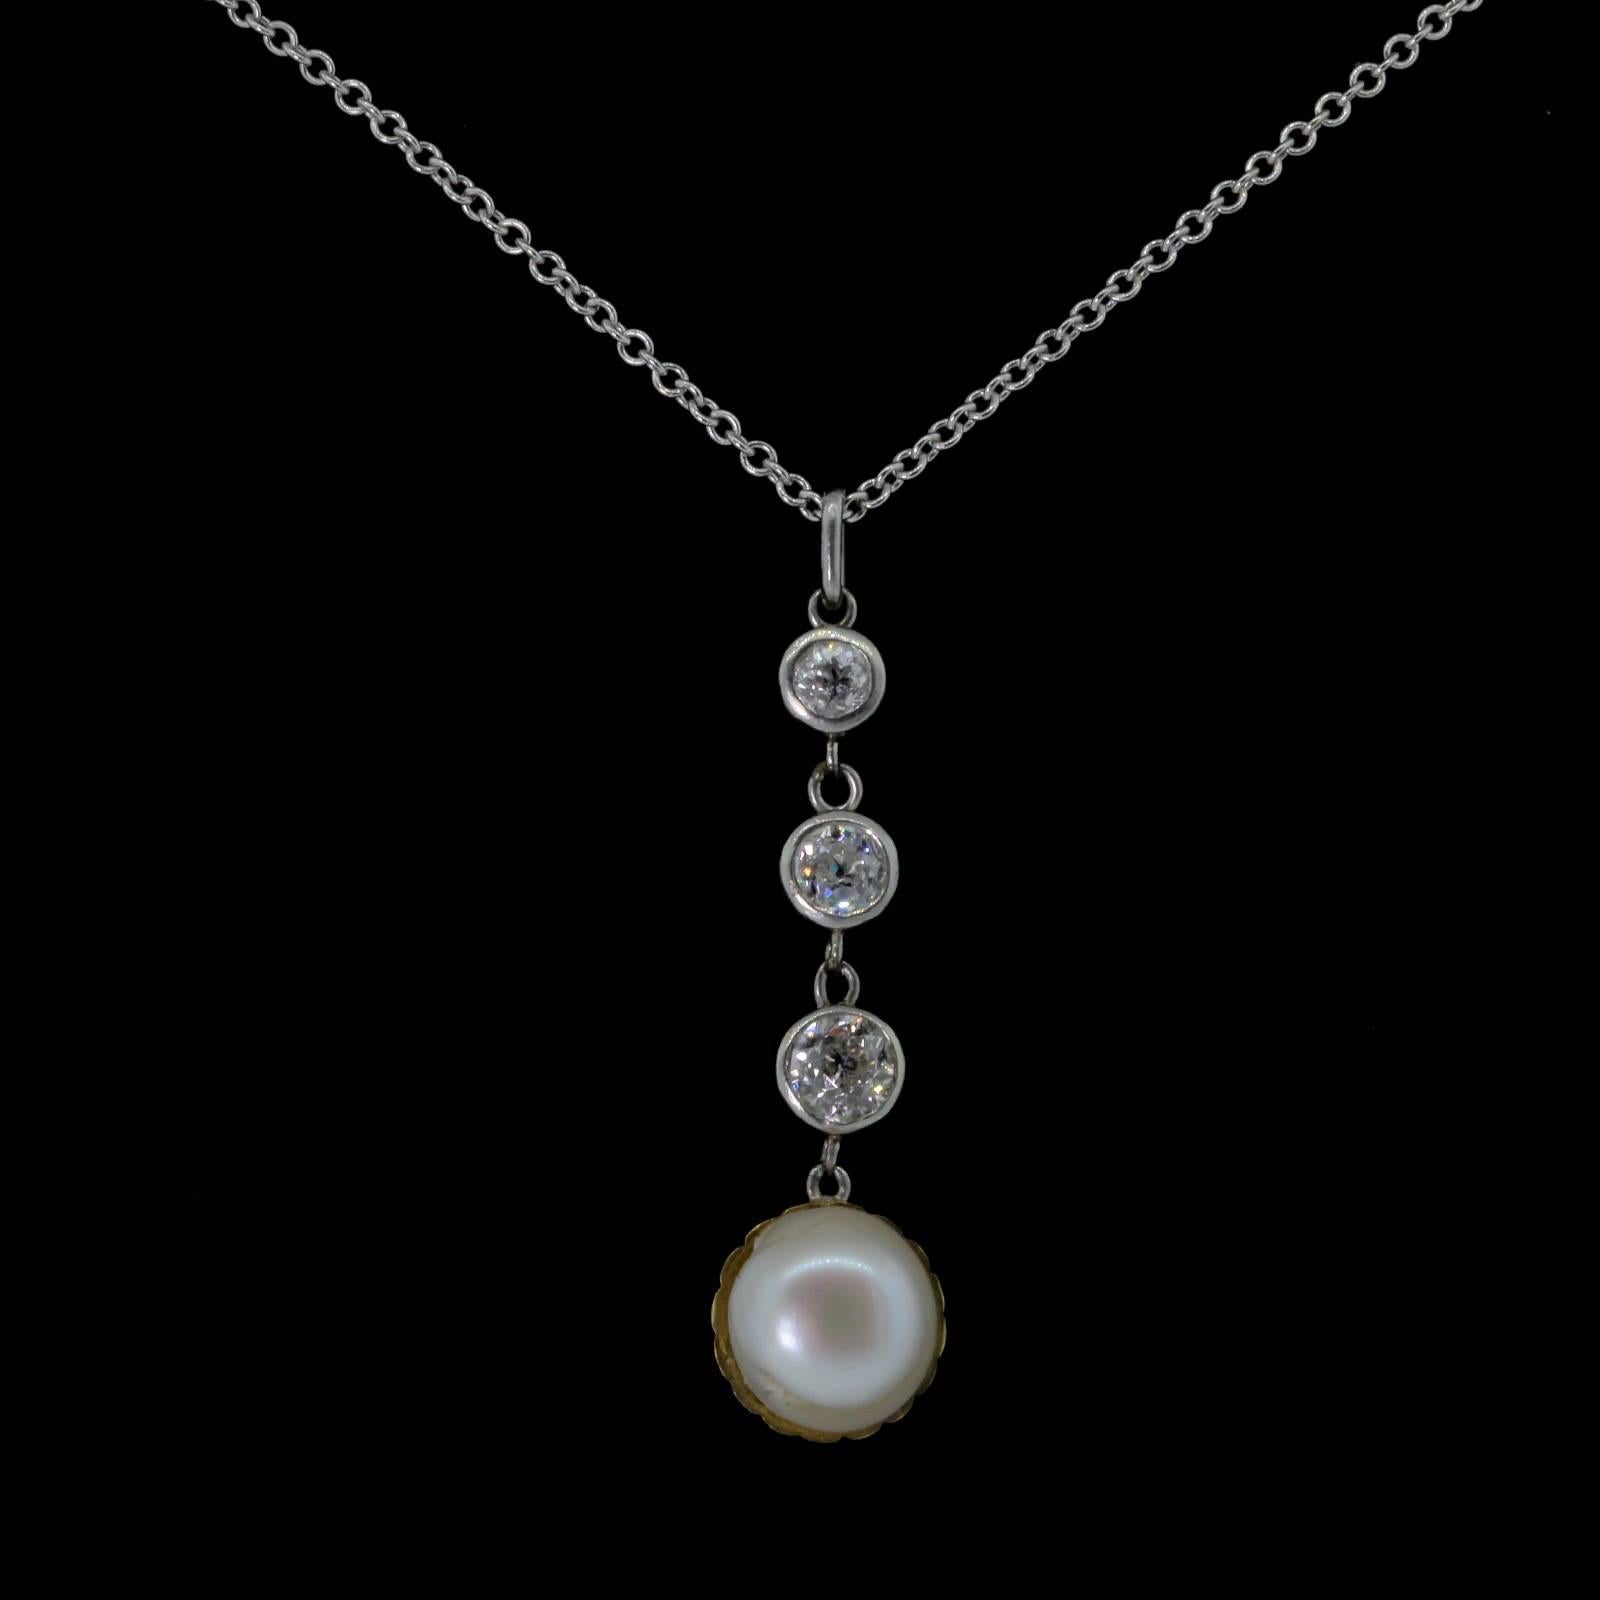 A beautiful coveted platinum top, articulated pendant that features three Old Mine Cut Diamonds weighing 0.60 carat; set in 14KT yellow gold bezels.  A dangling layered Natural Pearl is set on a yellow gold clam shell cup.  The beautiful Pearl